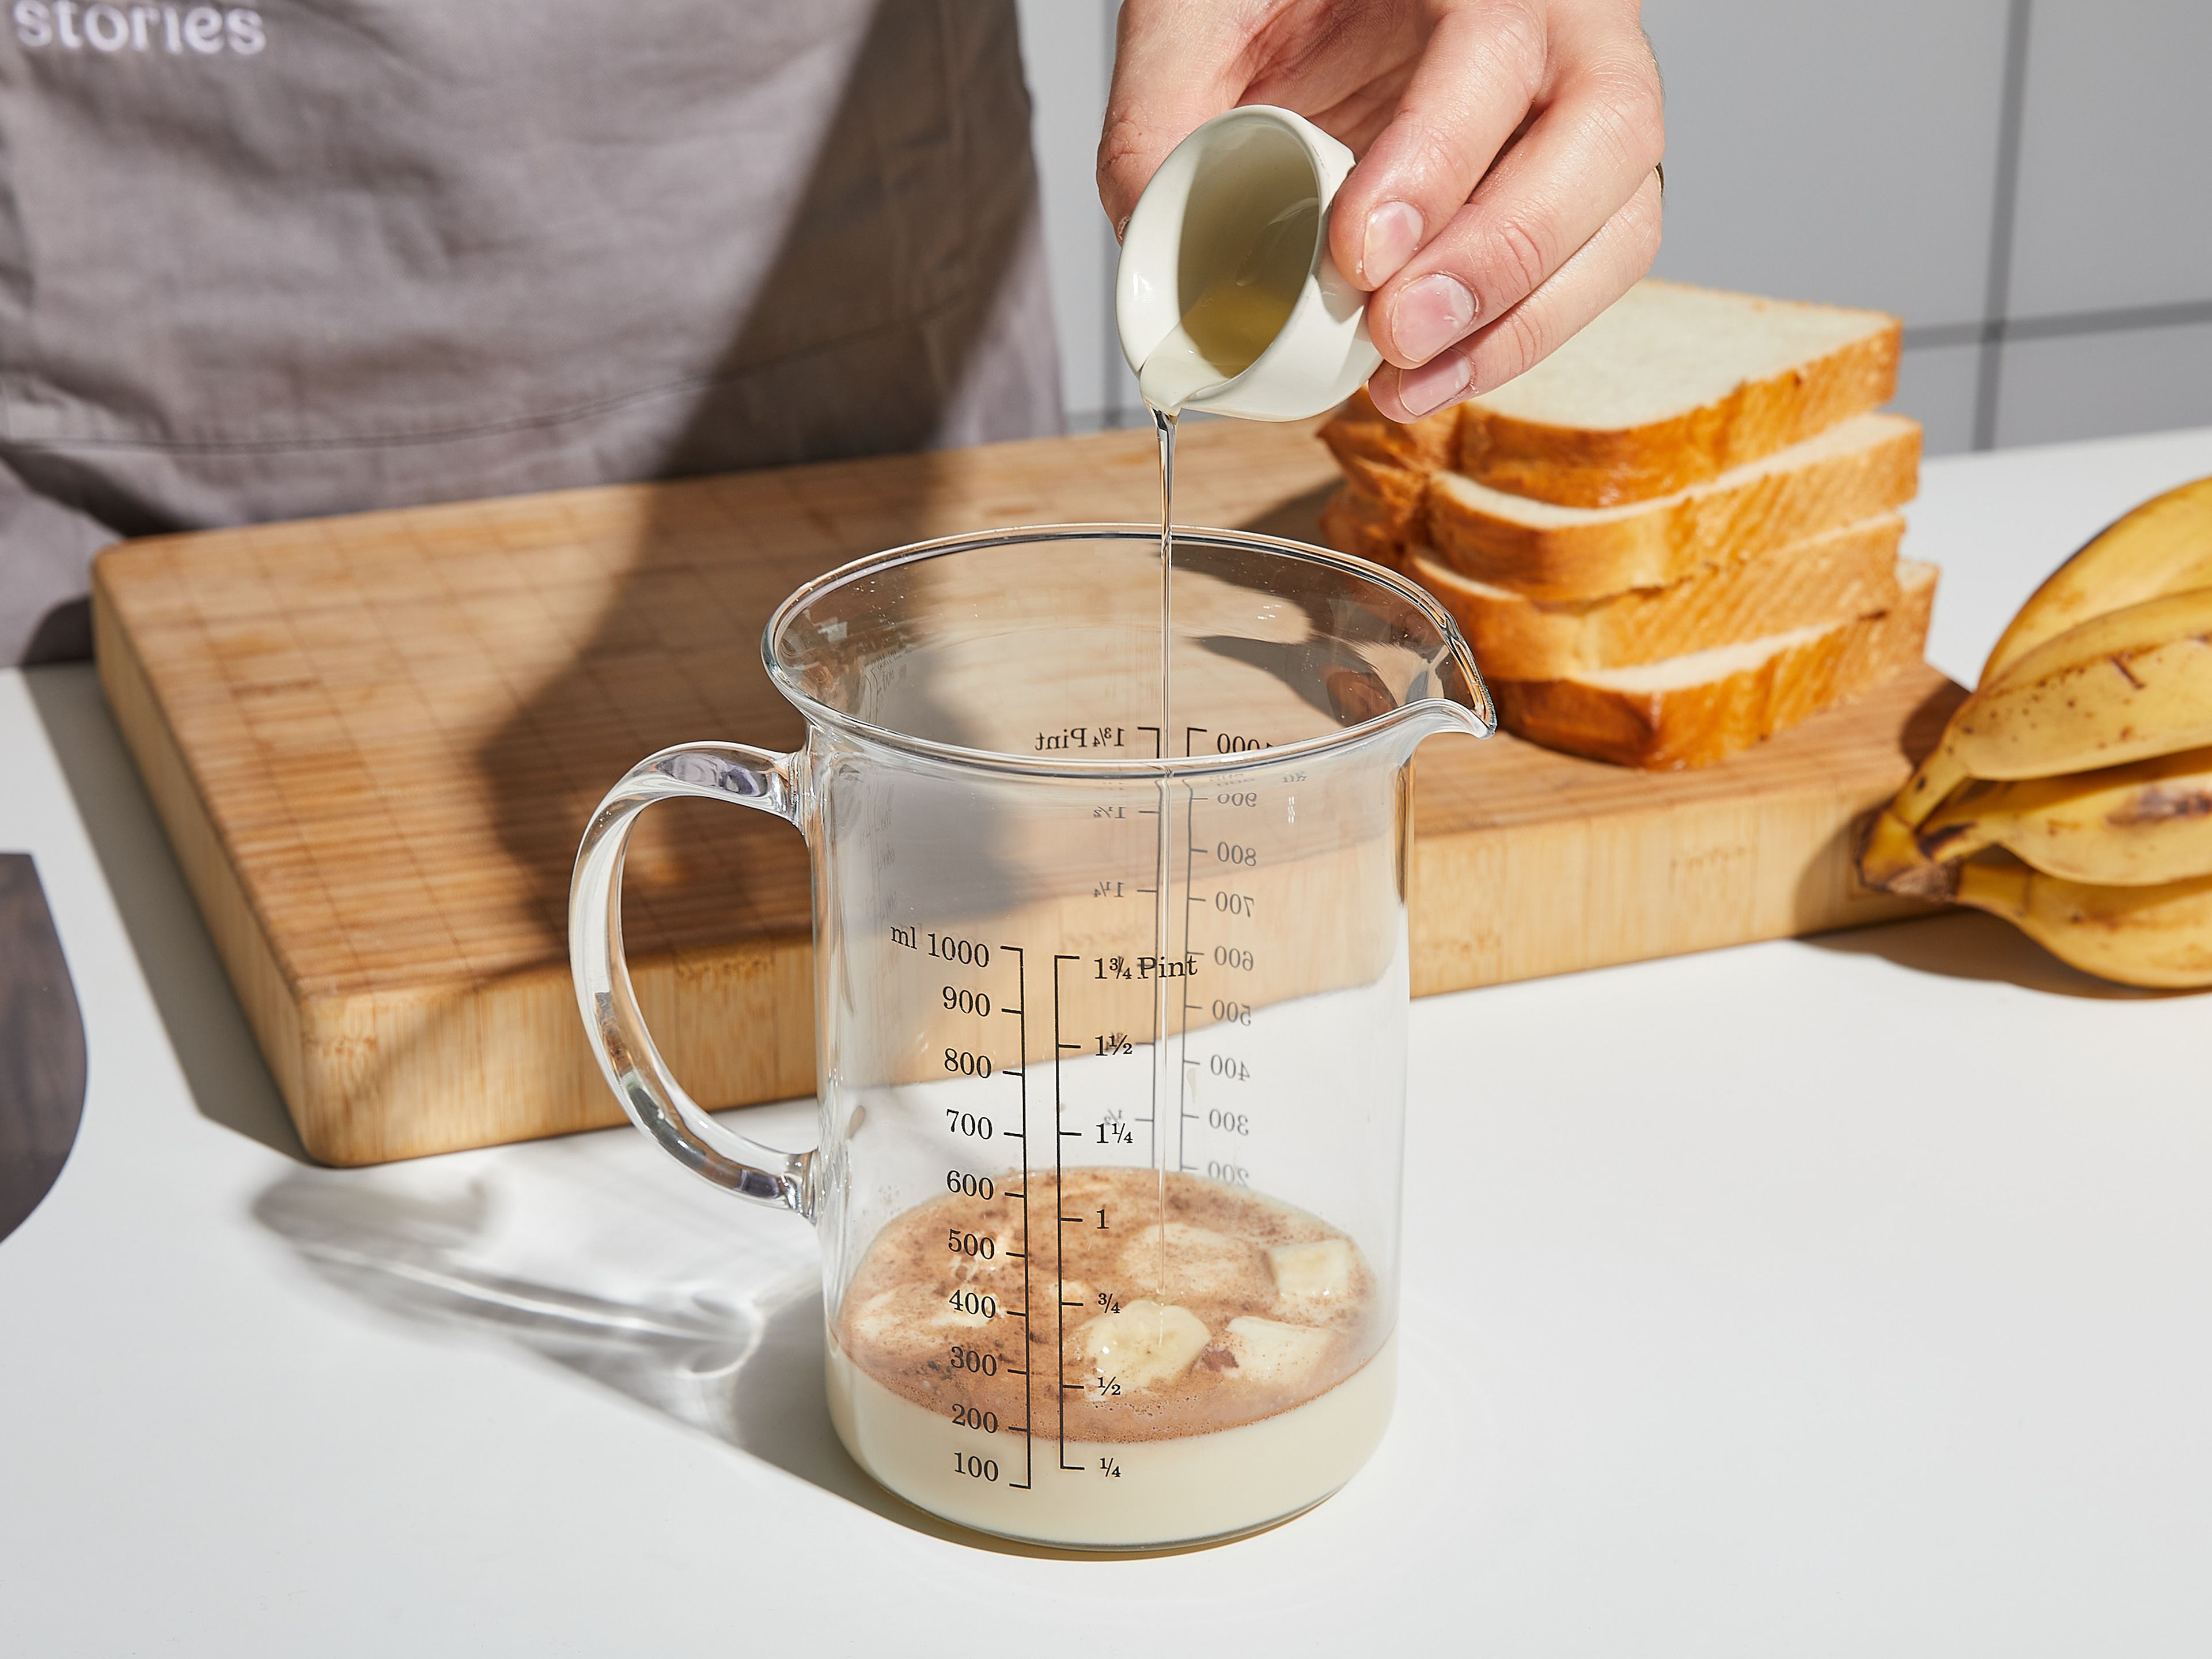 In a measuring cup, combine oat milk, cinnamon, agave nectar and the vanilla extract, if desired. Peel the bananas. Add ⅓ of the bananas to the measuring cup and blend finely using an immersion blender. Pour the banana mixture into a baking dish or deep plate. Cut the remaining bananas in a diagonal angle into 1.5–2 cm thick slices and set aside.